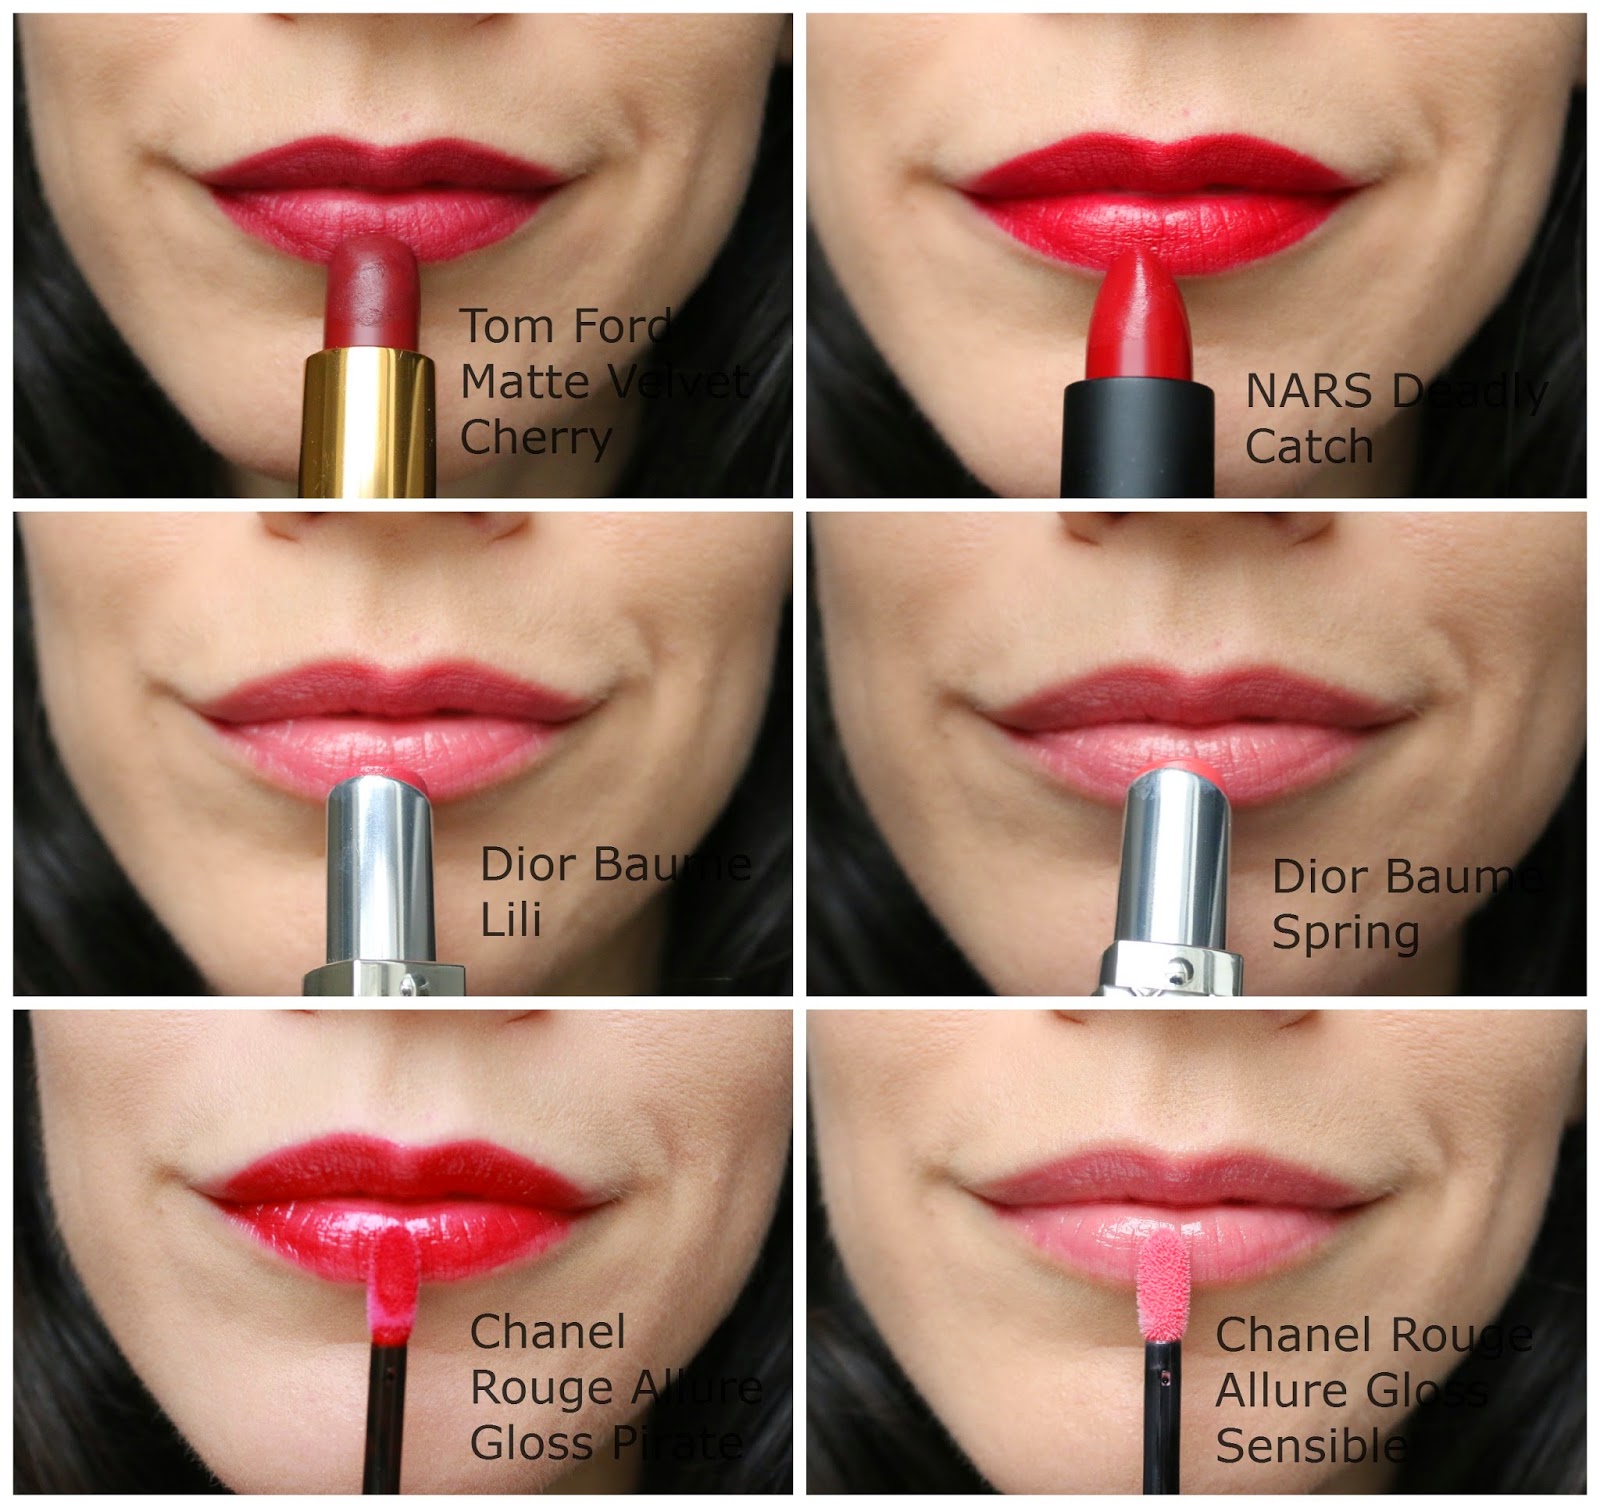 New Fall Lip Launches: Ford Matte Lip Color, Rouge Dior Baume, Chanel Rouge Allure Gloss and NARS Holiday alittlebitetc